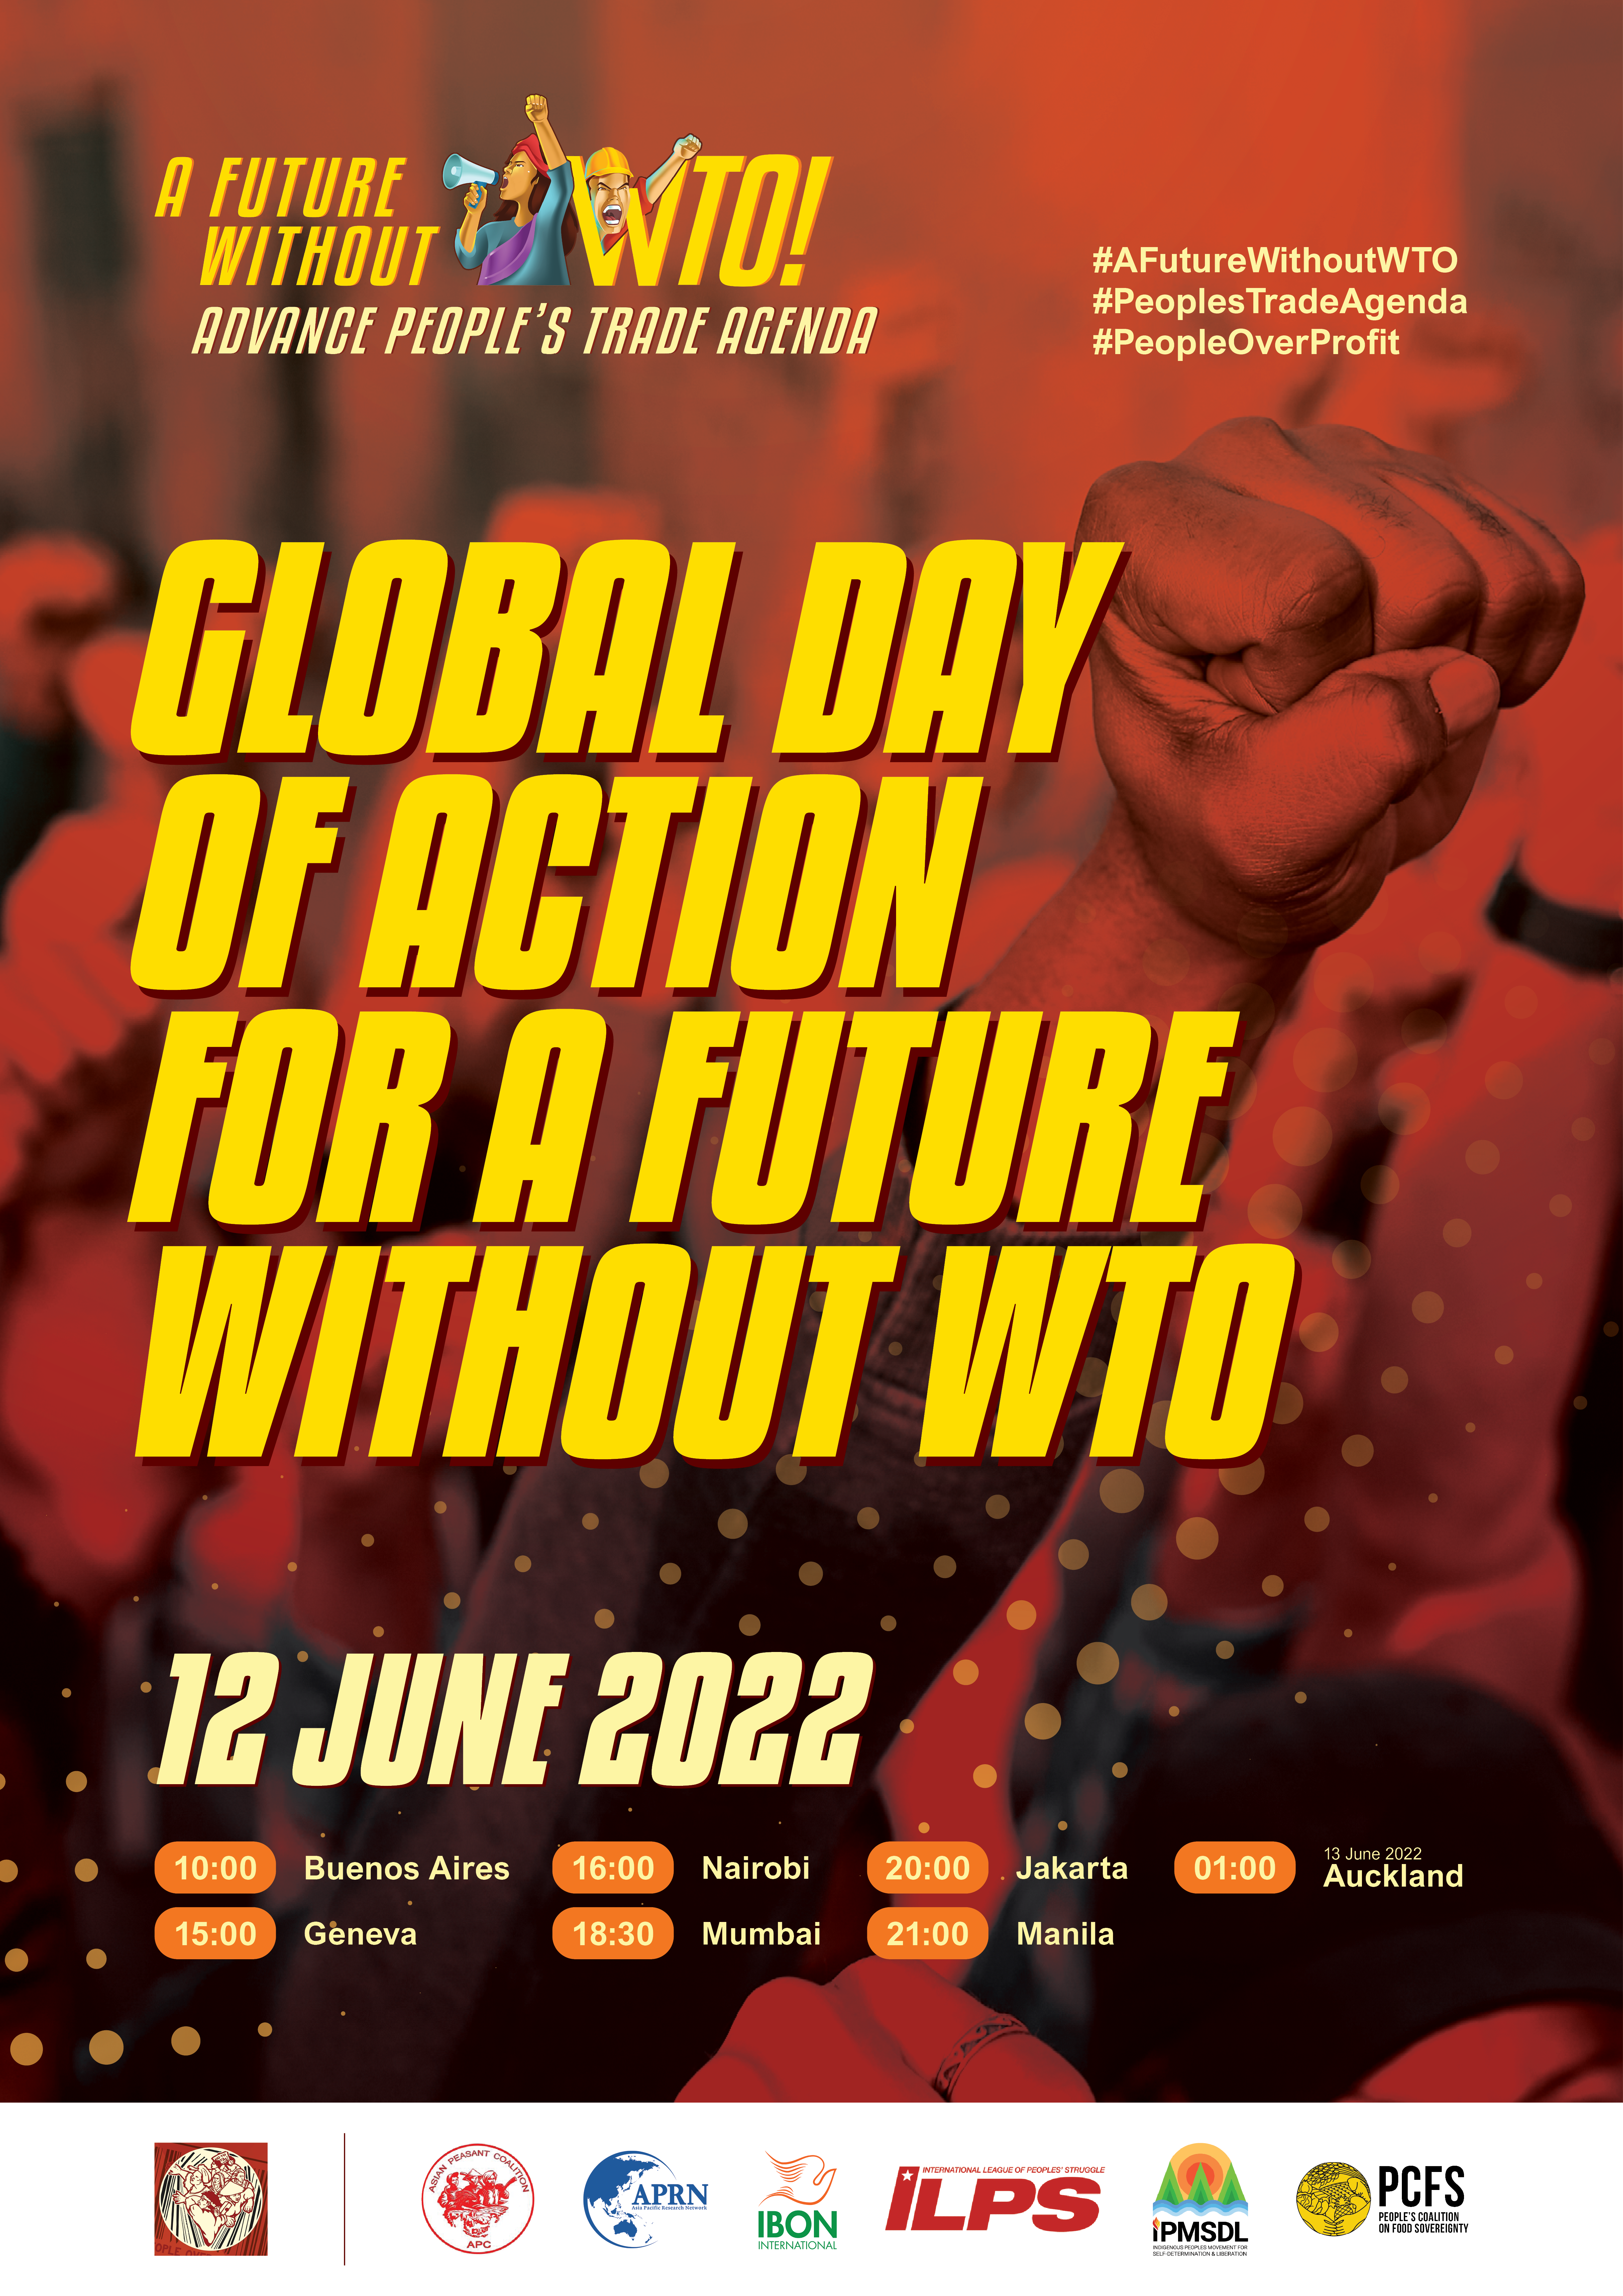 Global Day of Action for a Future Without WTO